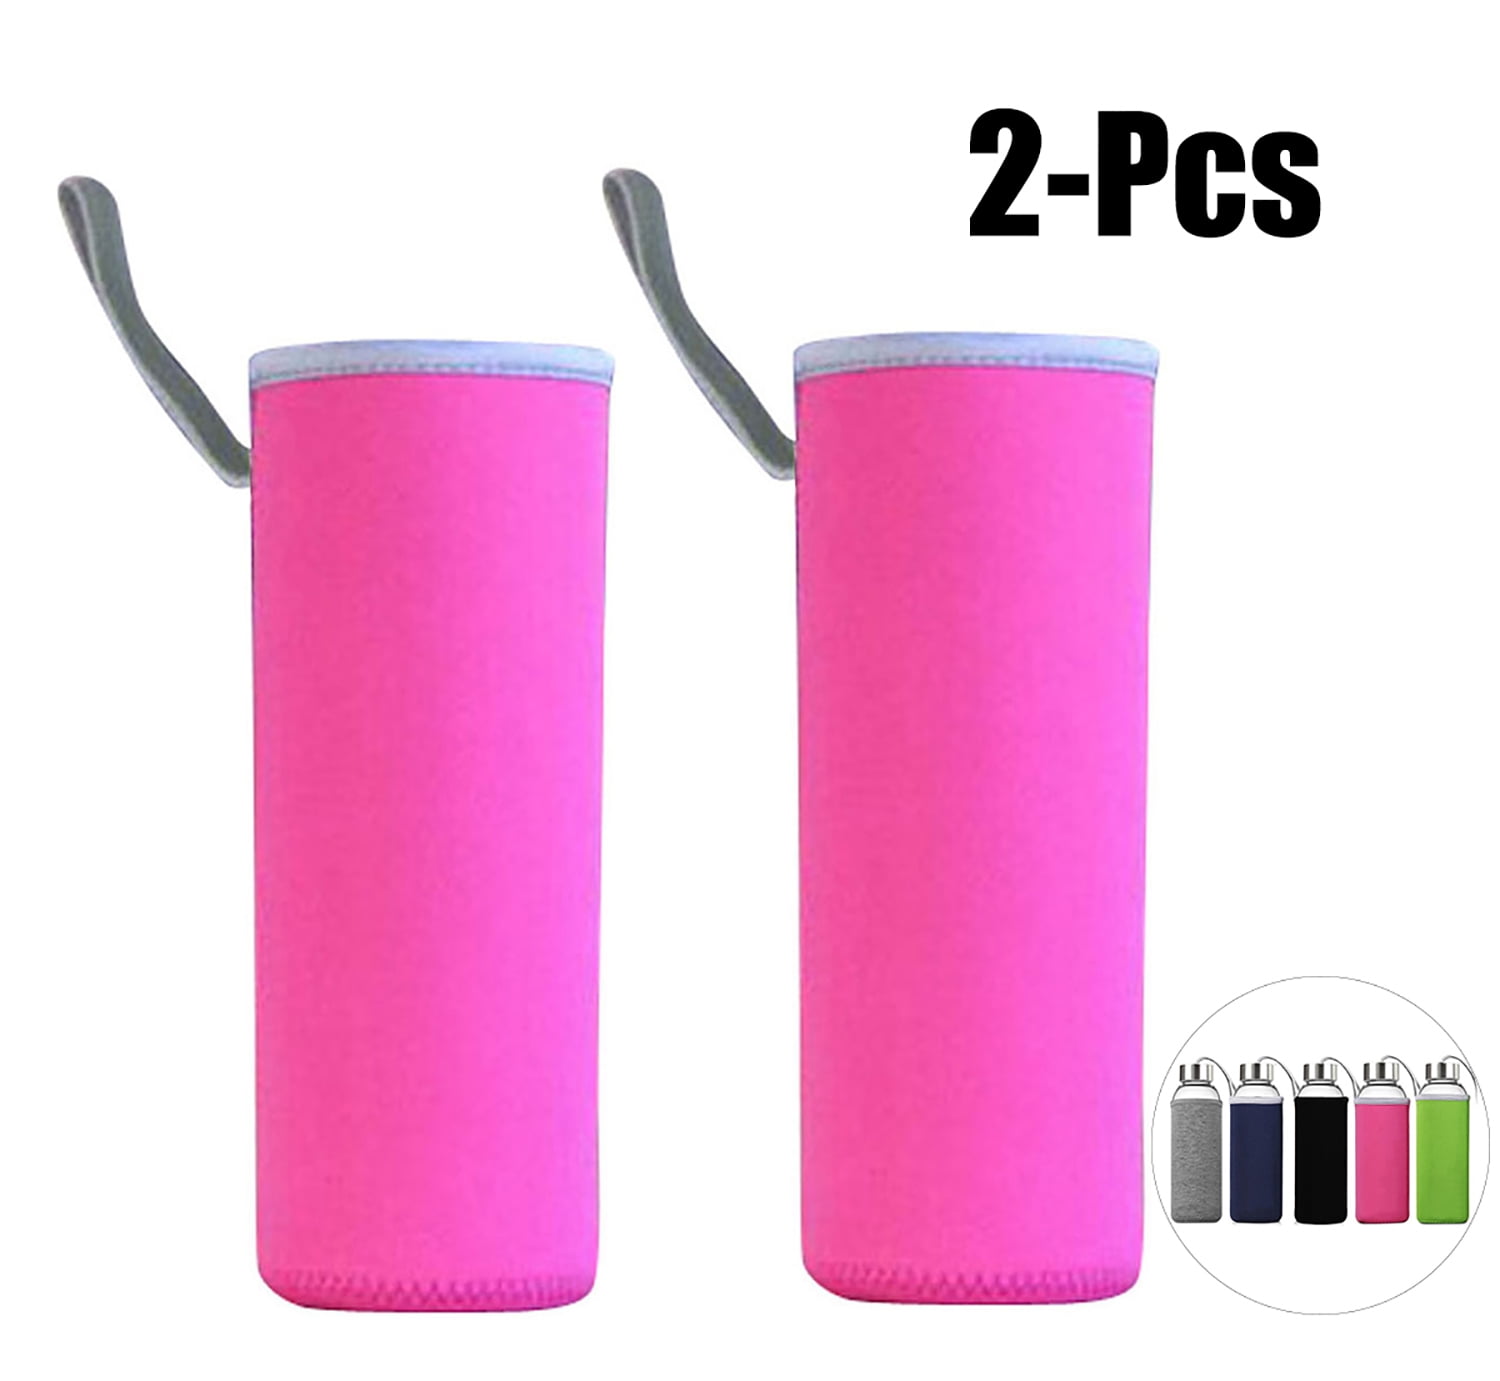 Neoprene Glass Water Bottle Sleeves - Vibrant Color 6-Pack of Protective  Holders 16-18 oz Capacity - Insulating Carriers Keep Your Drink Cool or Hot